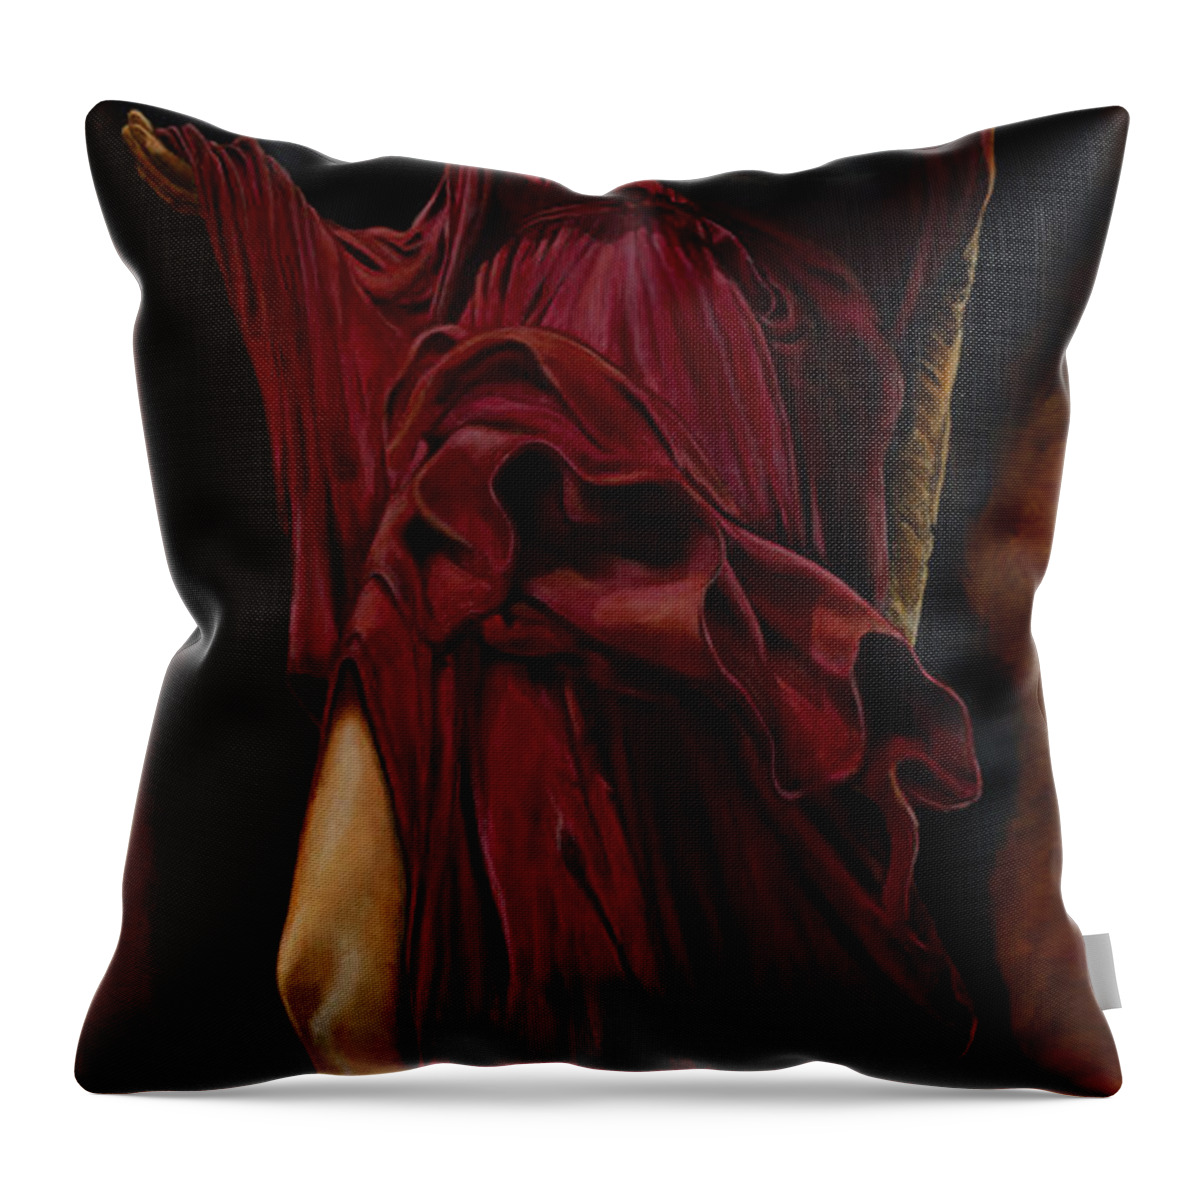 Giorgio Tuscani Throw Pillow featuring the painting The Guardian Of My Soul III by Giorgio Tuscani